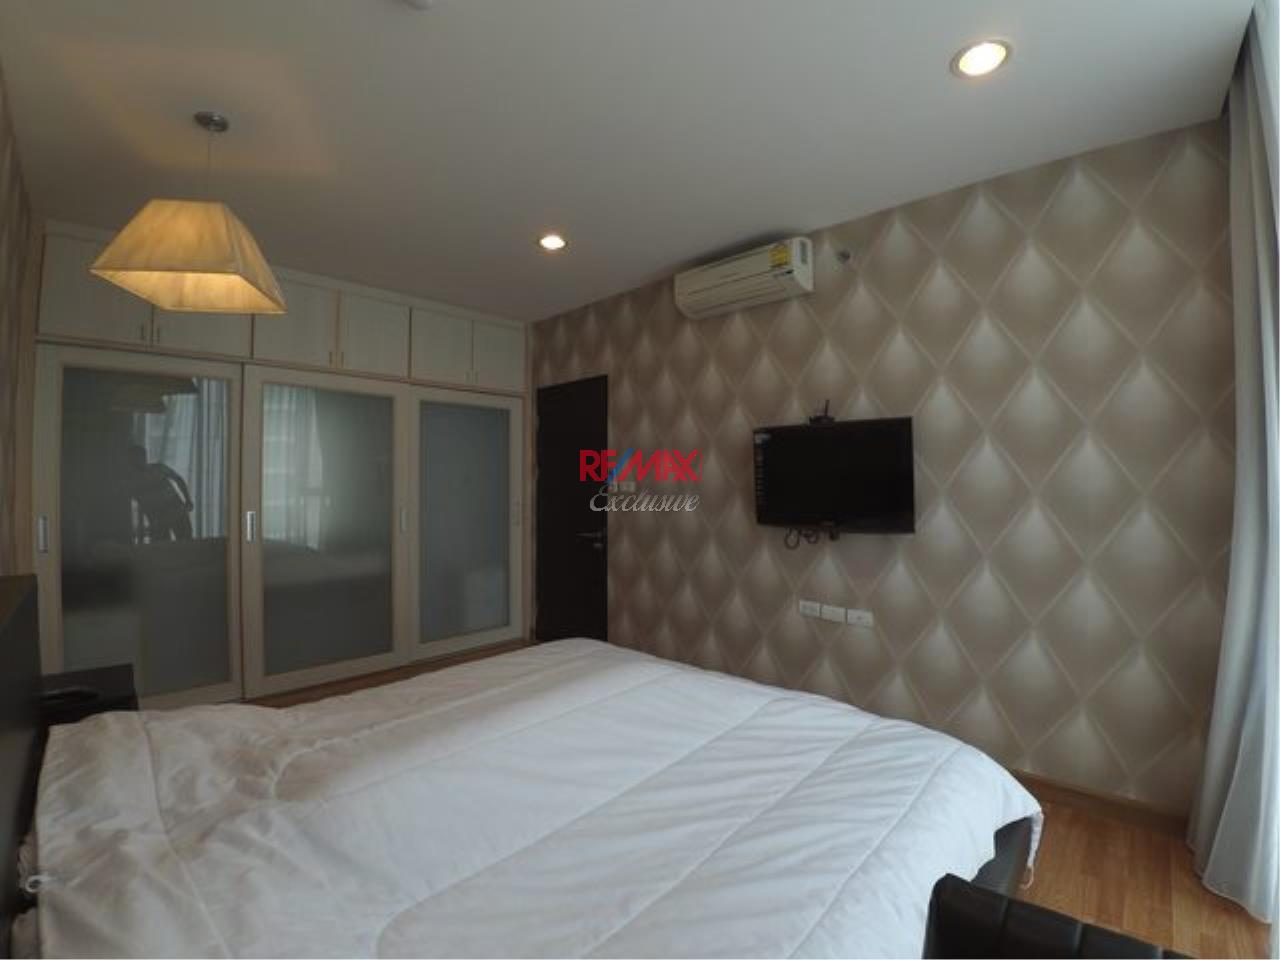 RE/MAX Exclusive Agency's THE ALCOVE, Thonglor 10, 44 Sqm., 1 Bedroom, Fully-Furnished, Fully Equipped Kitchen For RENT !!!! 5